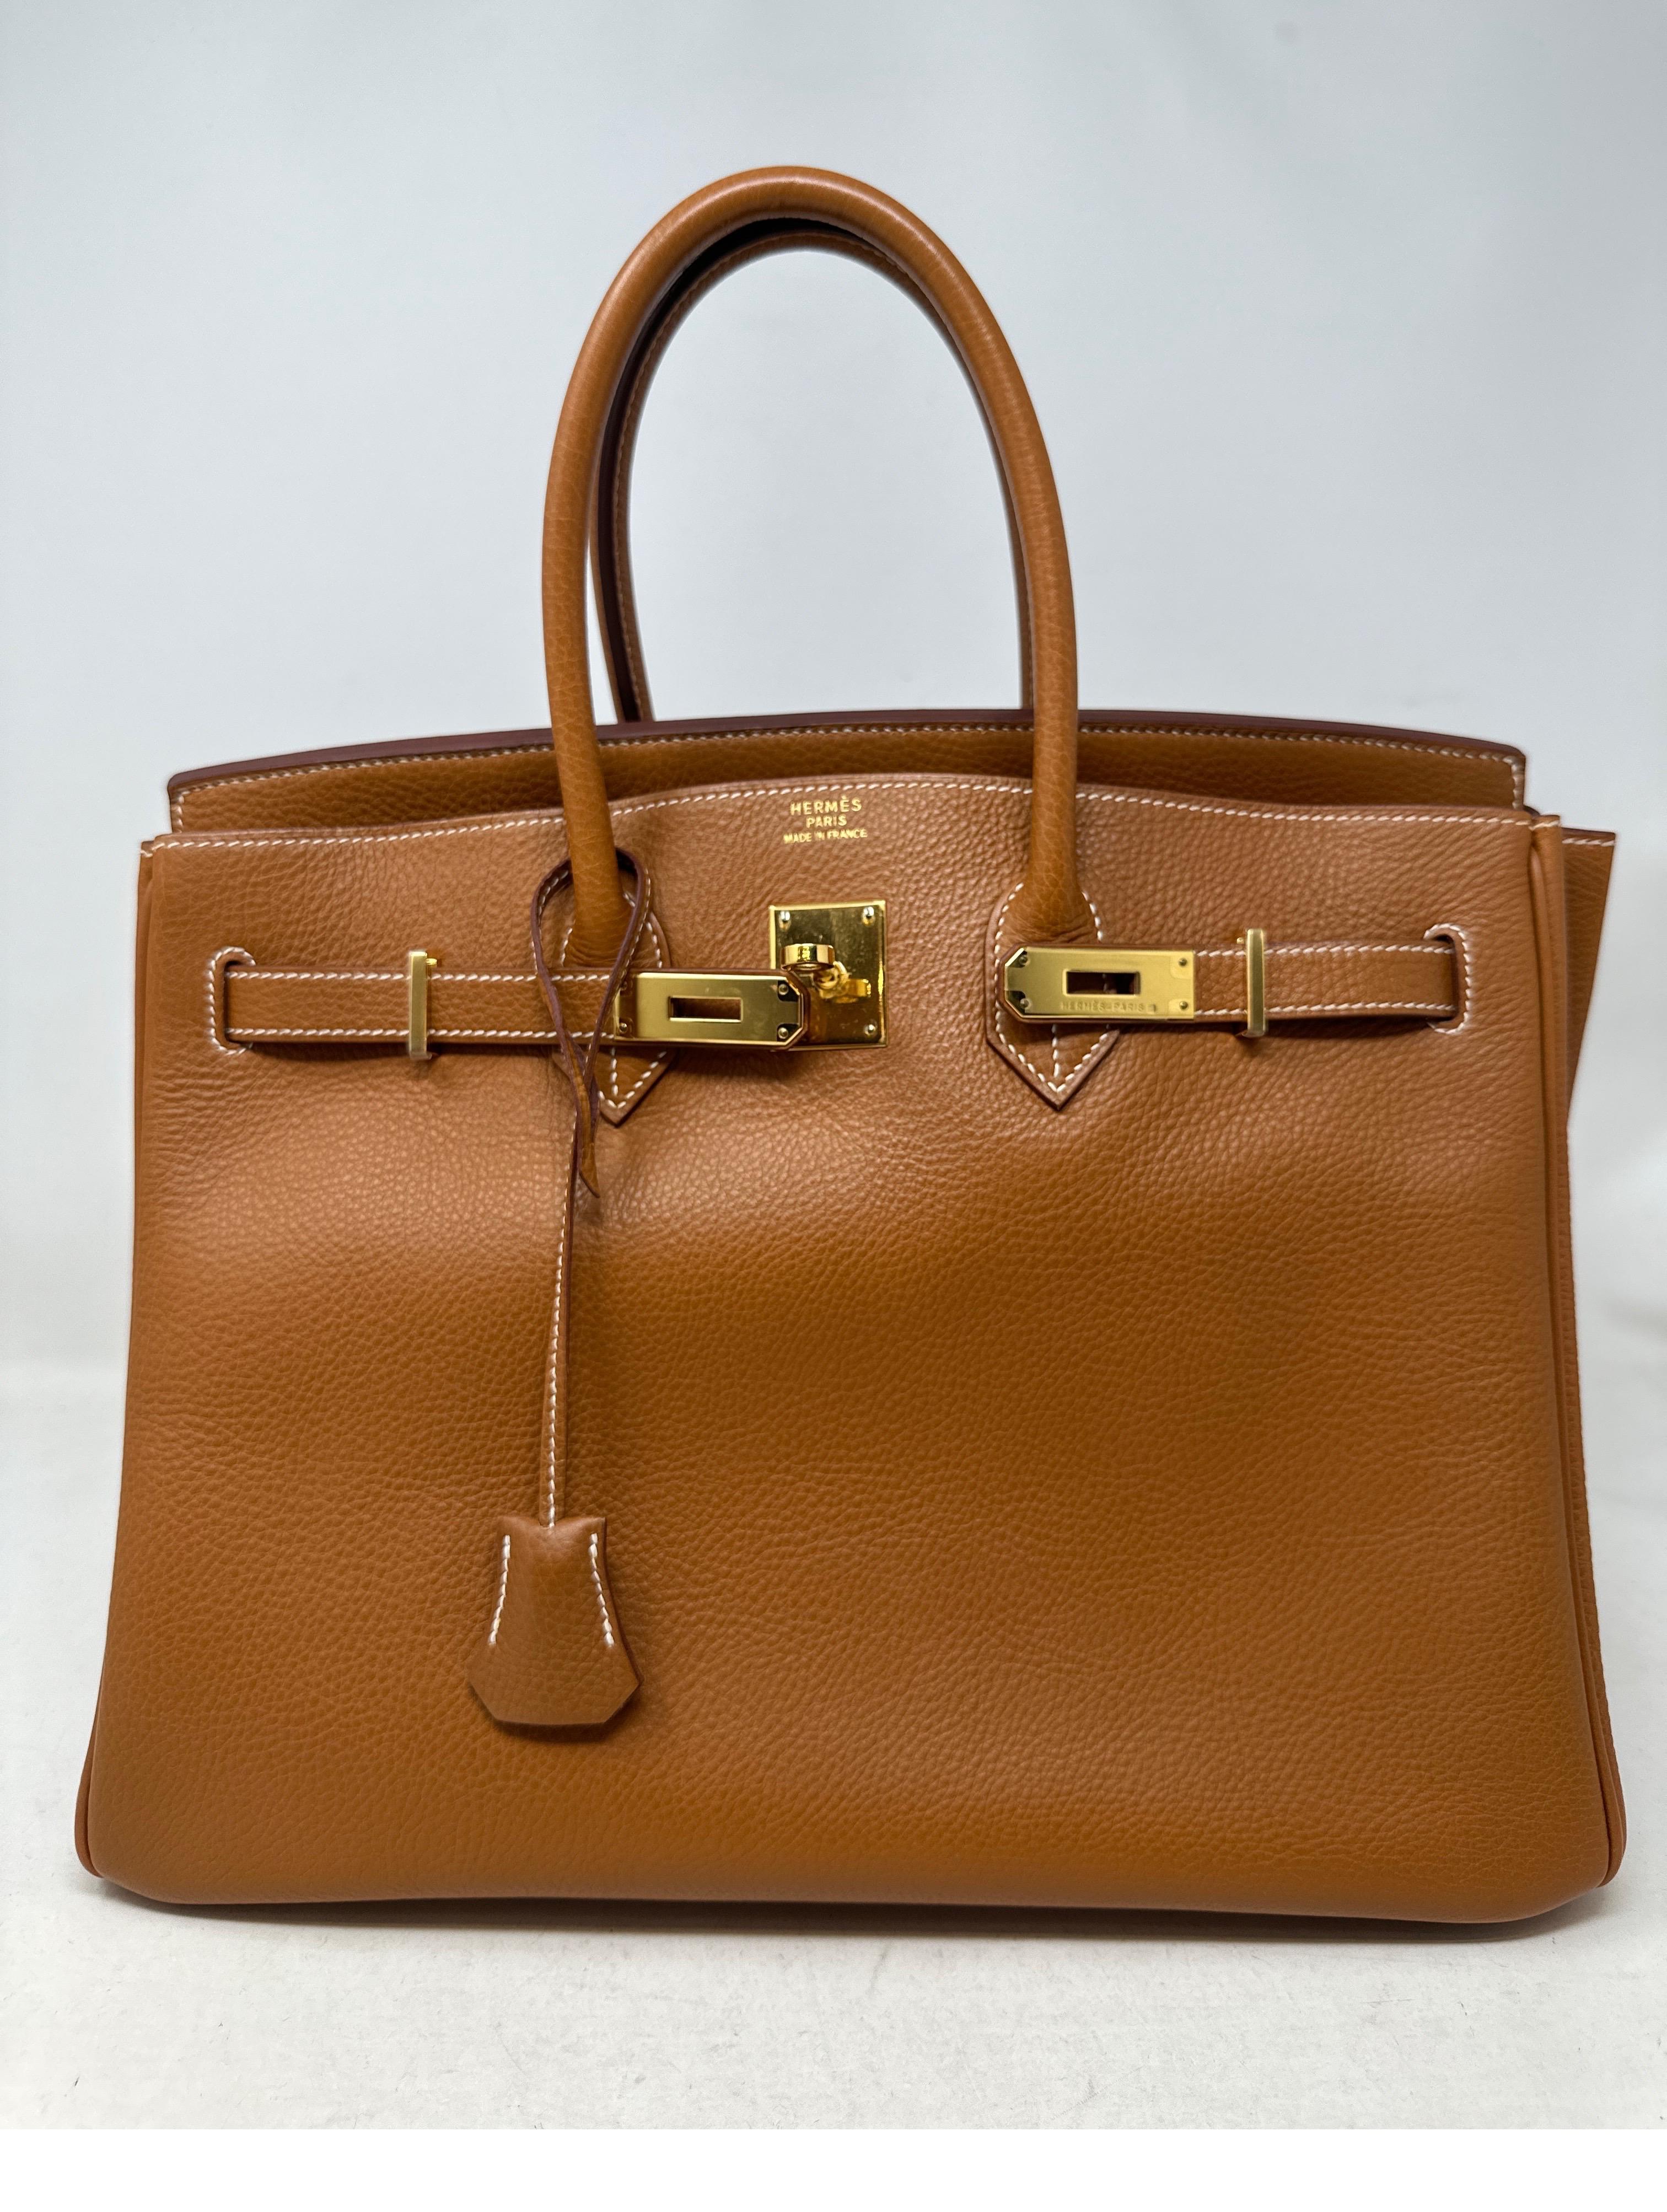 Hermes Gold Birkin 35 Bag. Excellent condition. Most coveted combination. Gold with gold hardware. Interior clean. Togo leather with plastic still on the hardware. This bag is amazing. Great investment bag. Priced to sell. Includes clochette, lock,